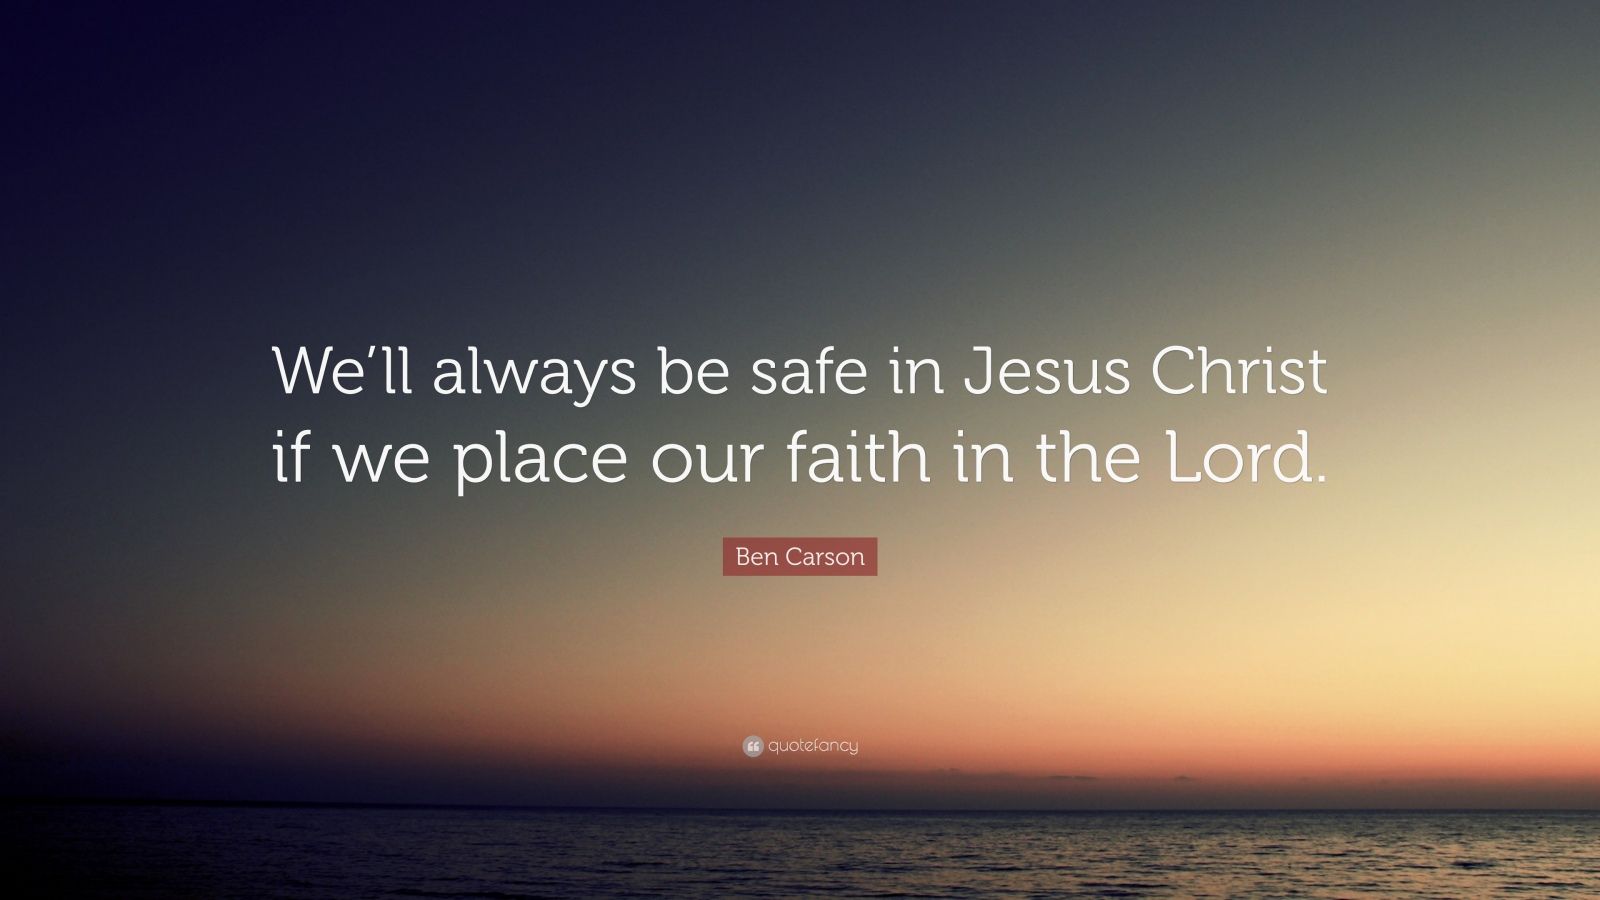 Ben Carson Quote: “We’ll always be safe in Jesus Christ if we place our ...